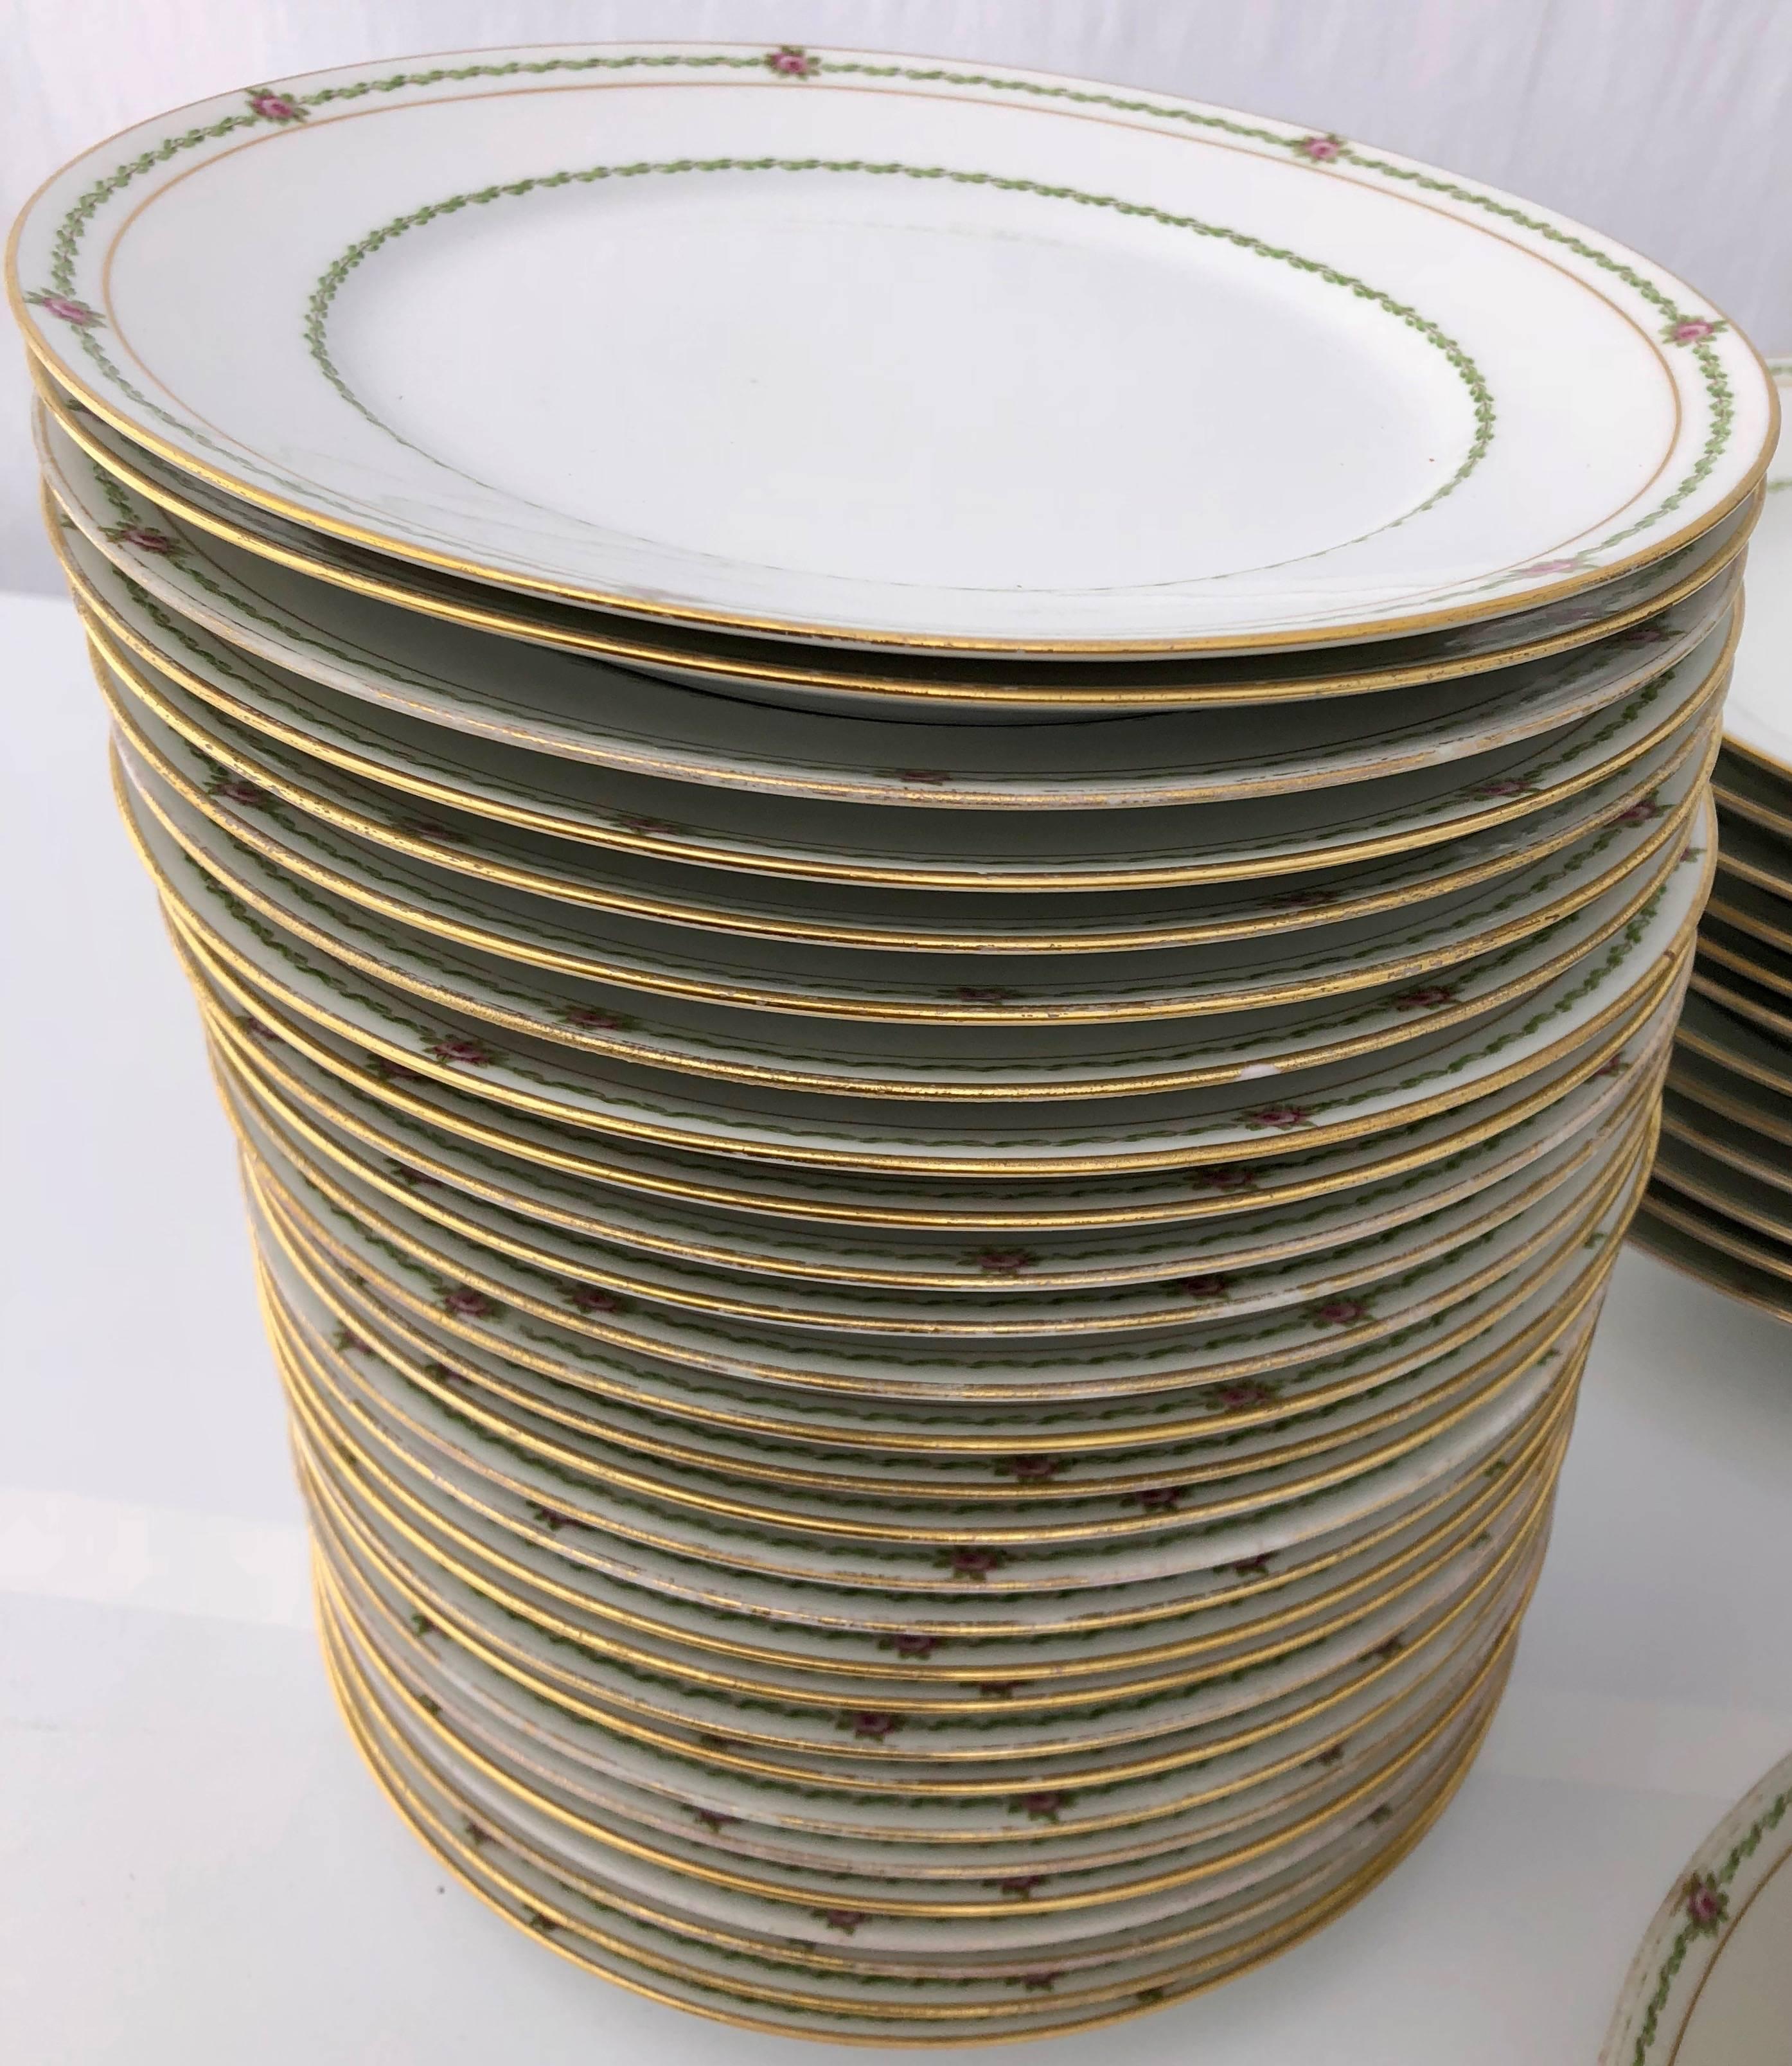 This beautiful set of French porcelain china plates has a delicate rose pattern and a gold plated border. It is an extensive setting totaling 94 pieces. This model has been in the same family in Lorraine for at least 80 years so it could be dated